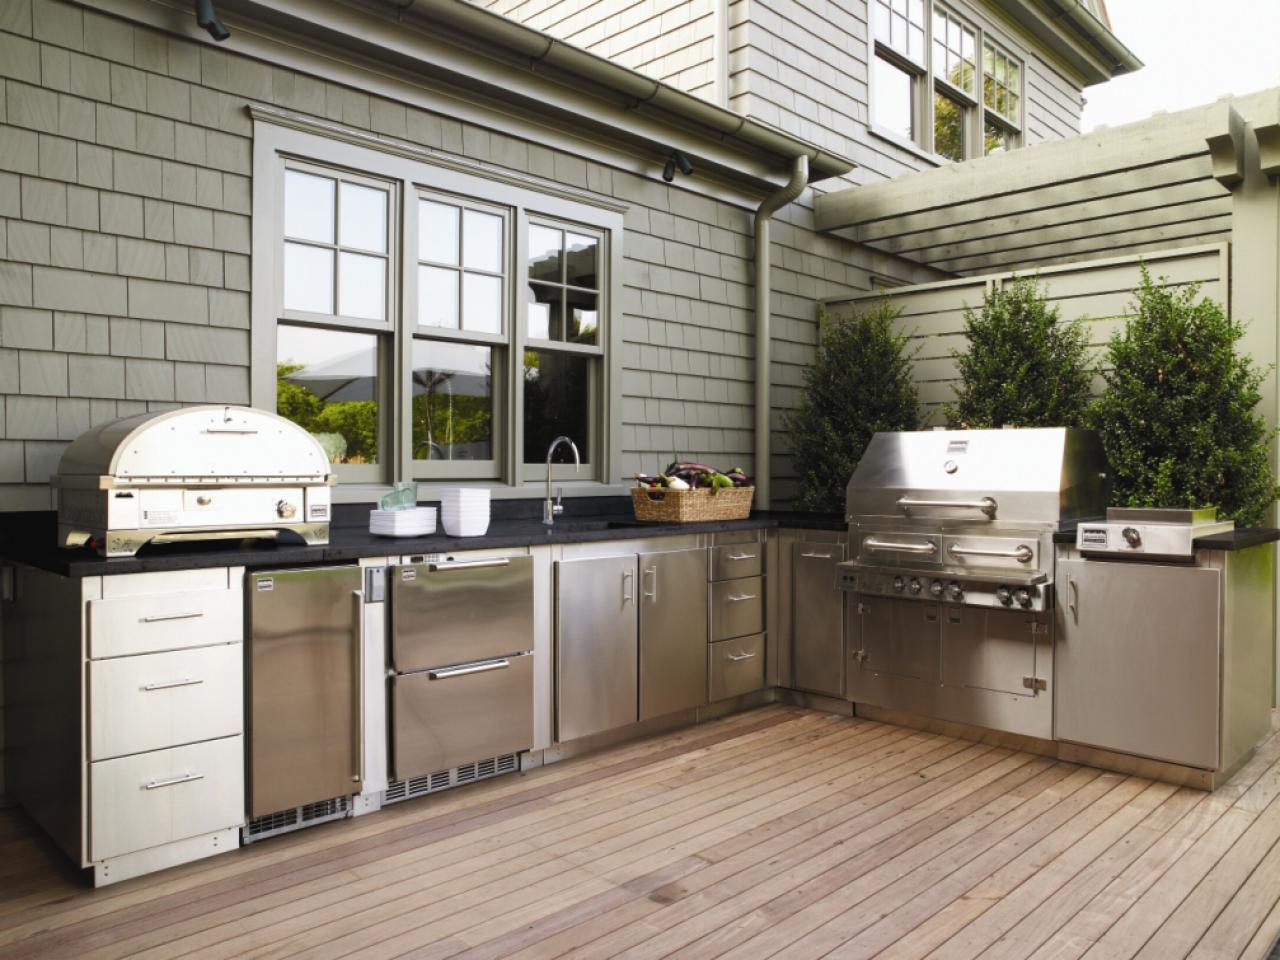 Small Outdoor Kitchen Ideas: Pictures & Tips From HGTV | HGTV